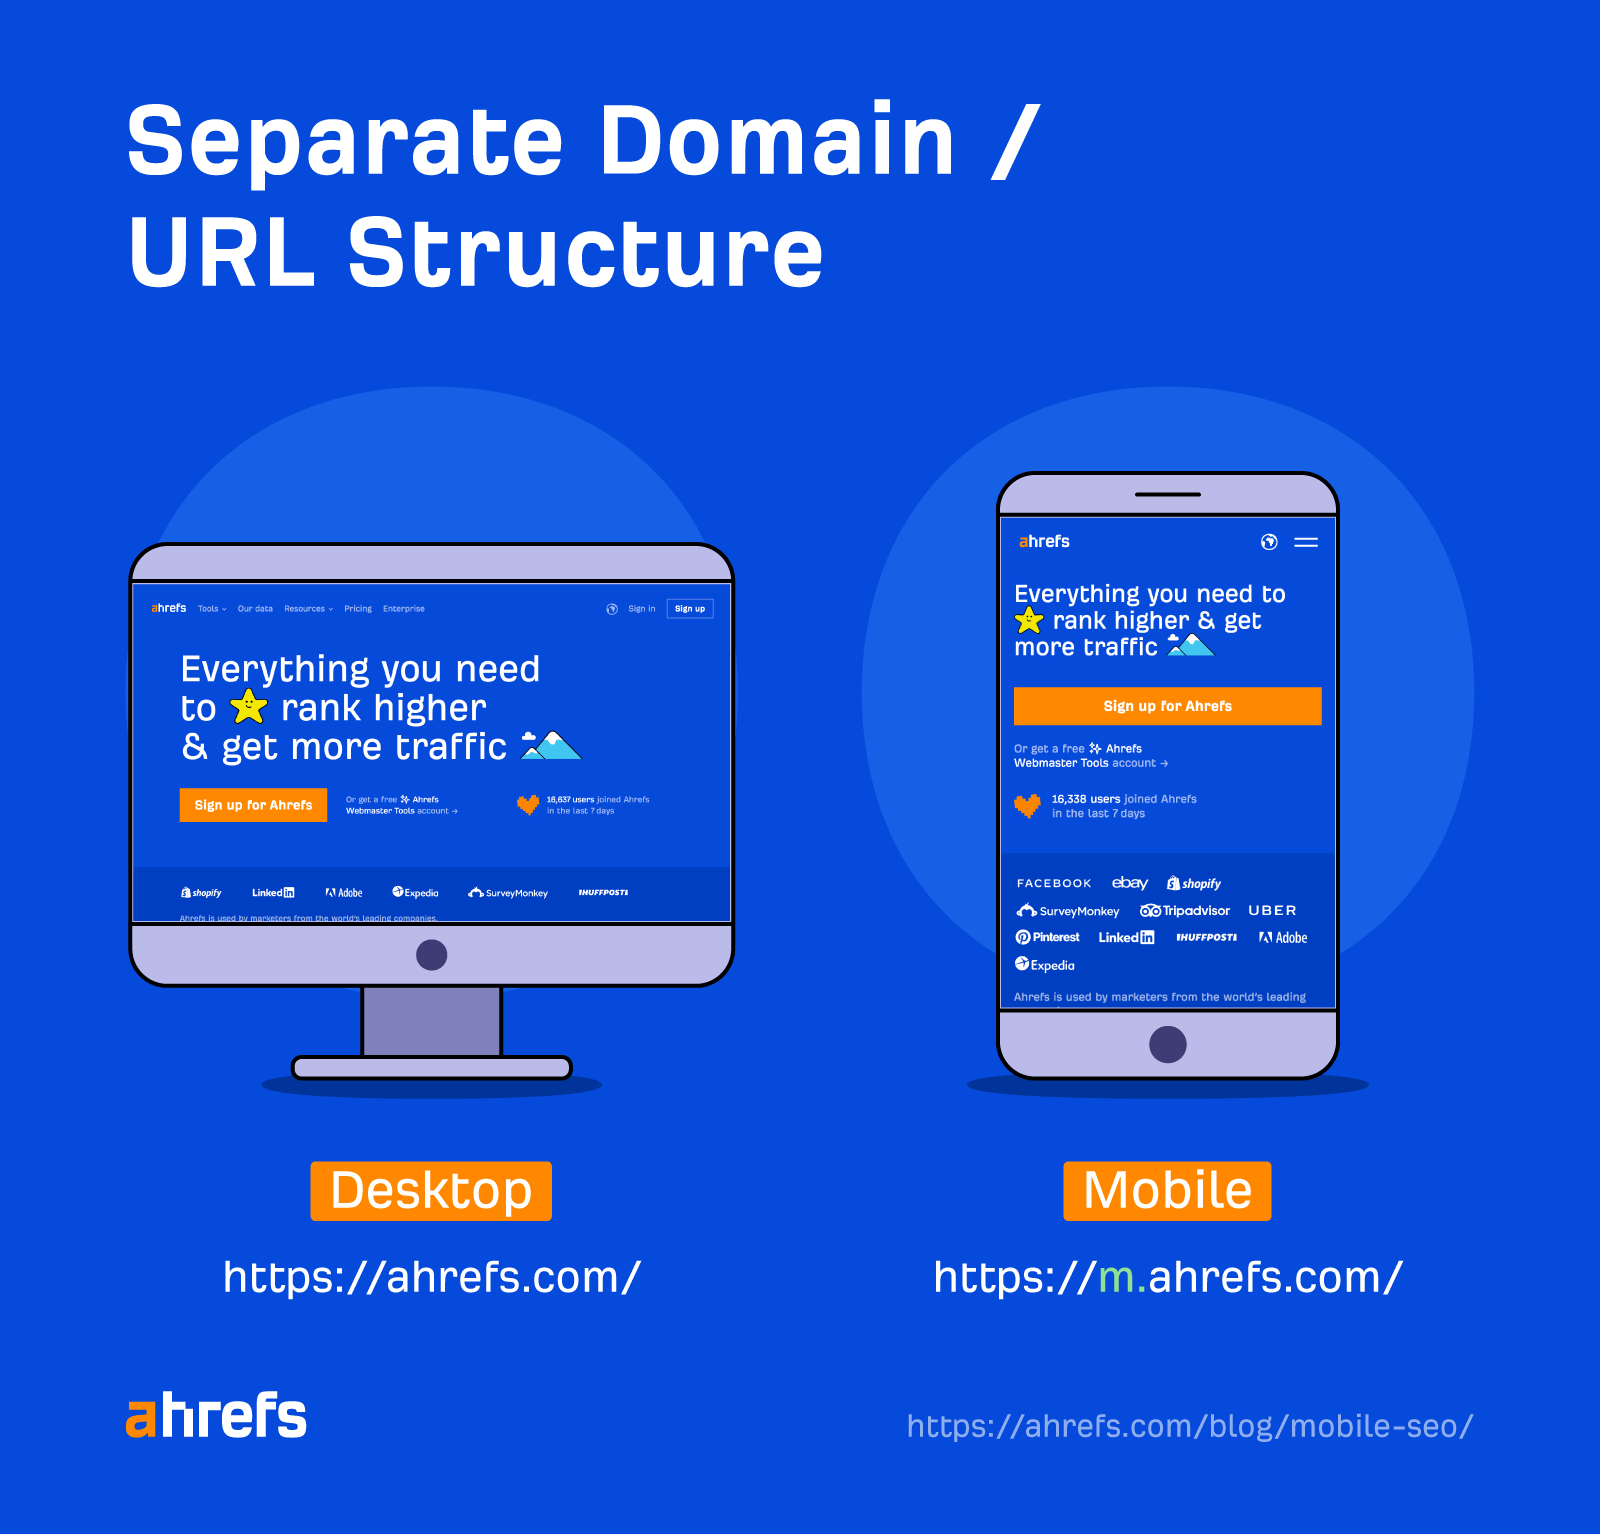 separate-domain-url-structure Mobile SEO: 10 Optimization Tips to Build a Mobile-Friendly Site